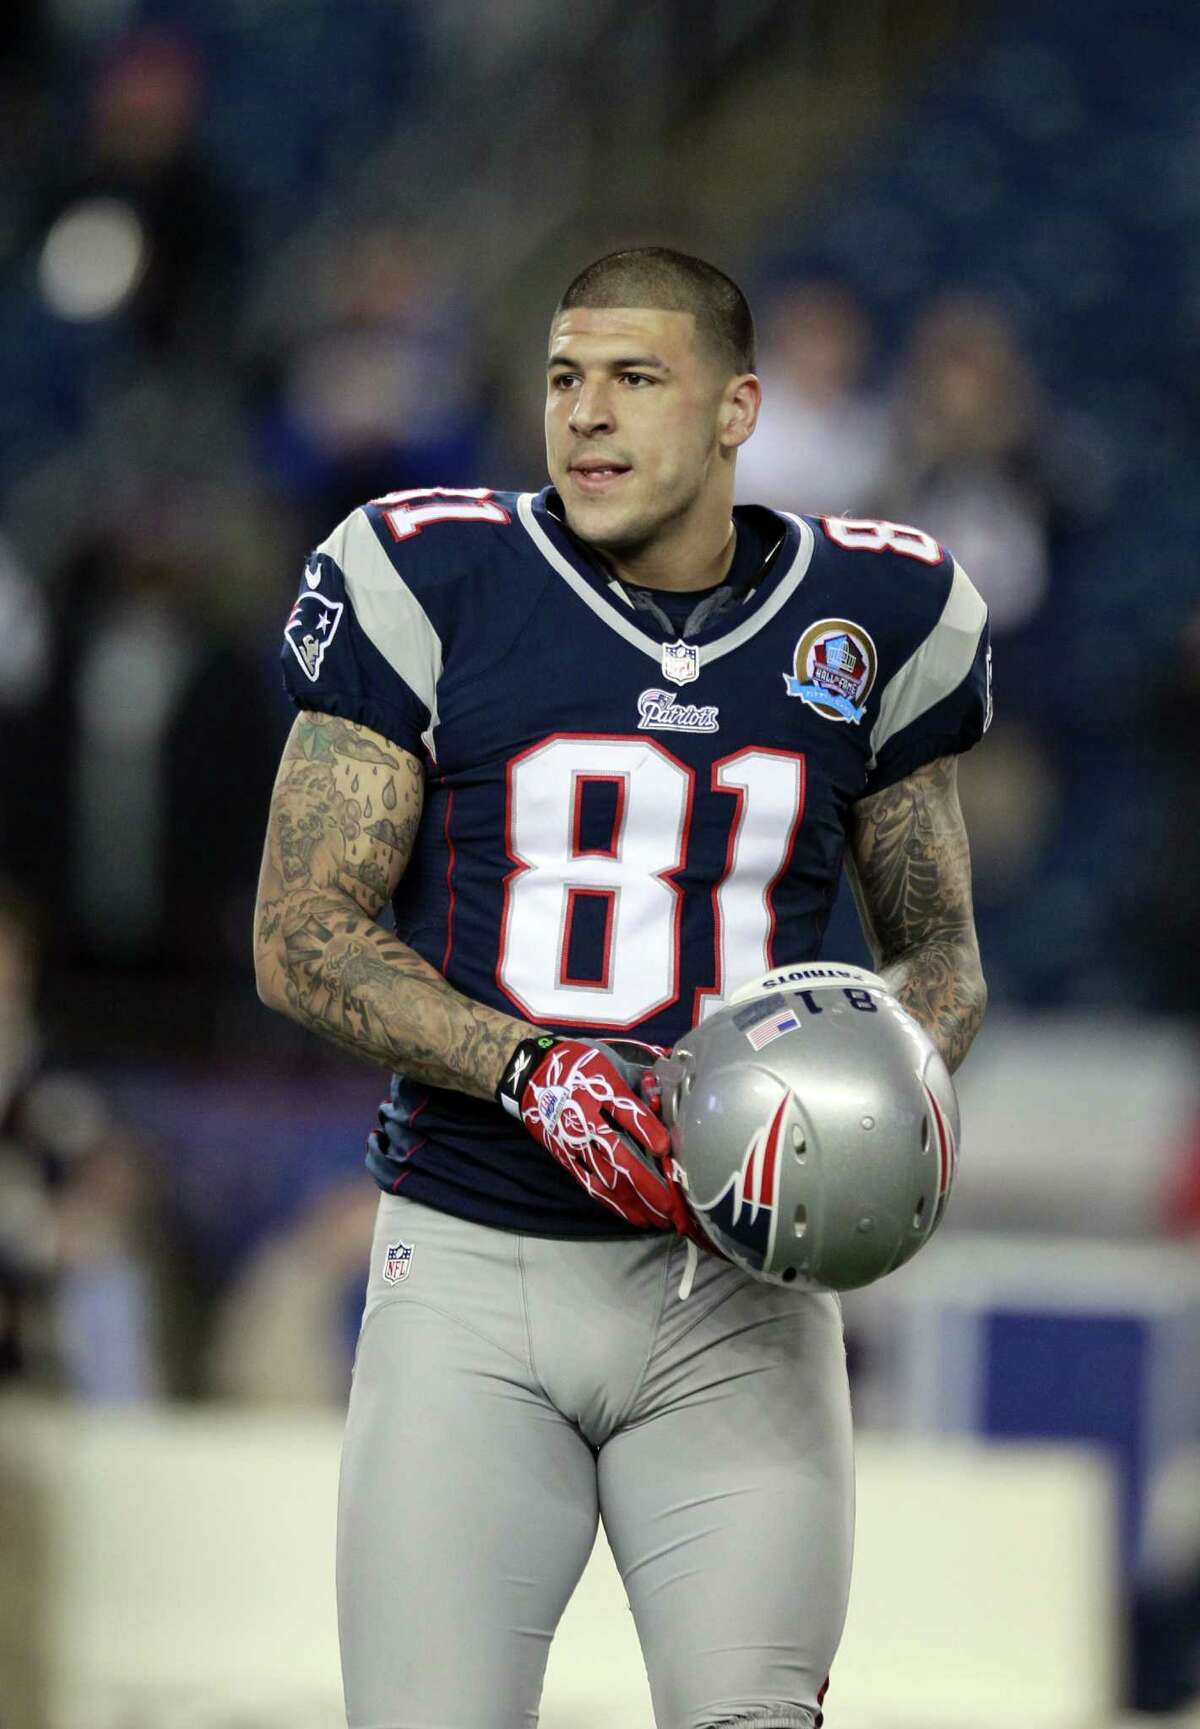 A body was found near Aaron Hernandez's home Monday.